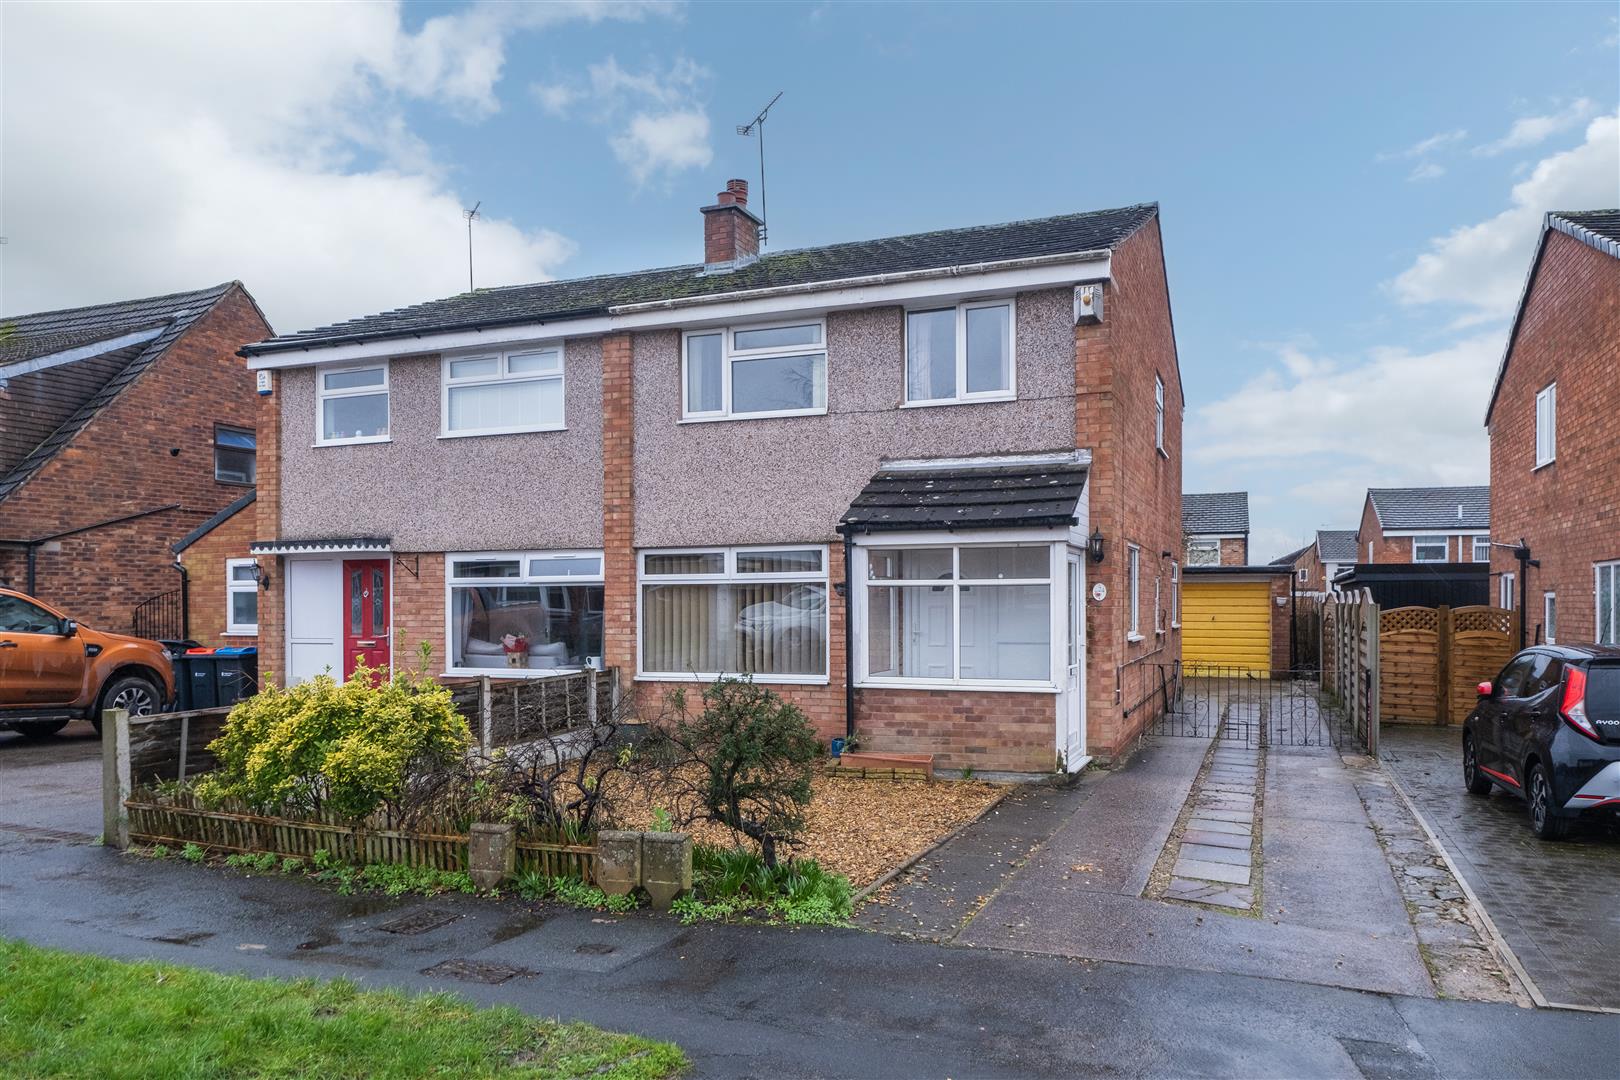 3 bedroom  House for Sale in Northwich